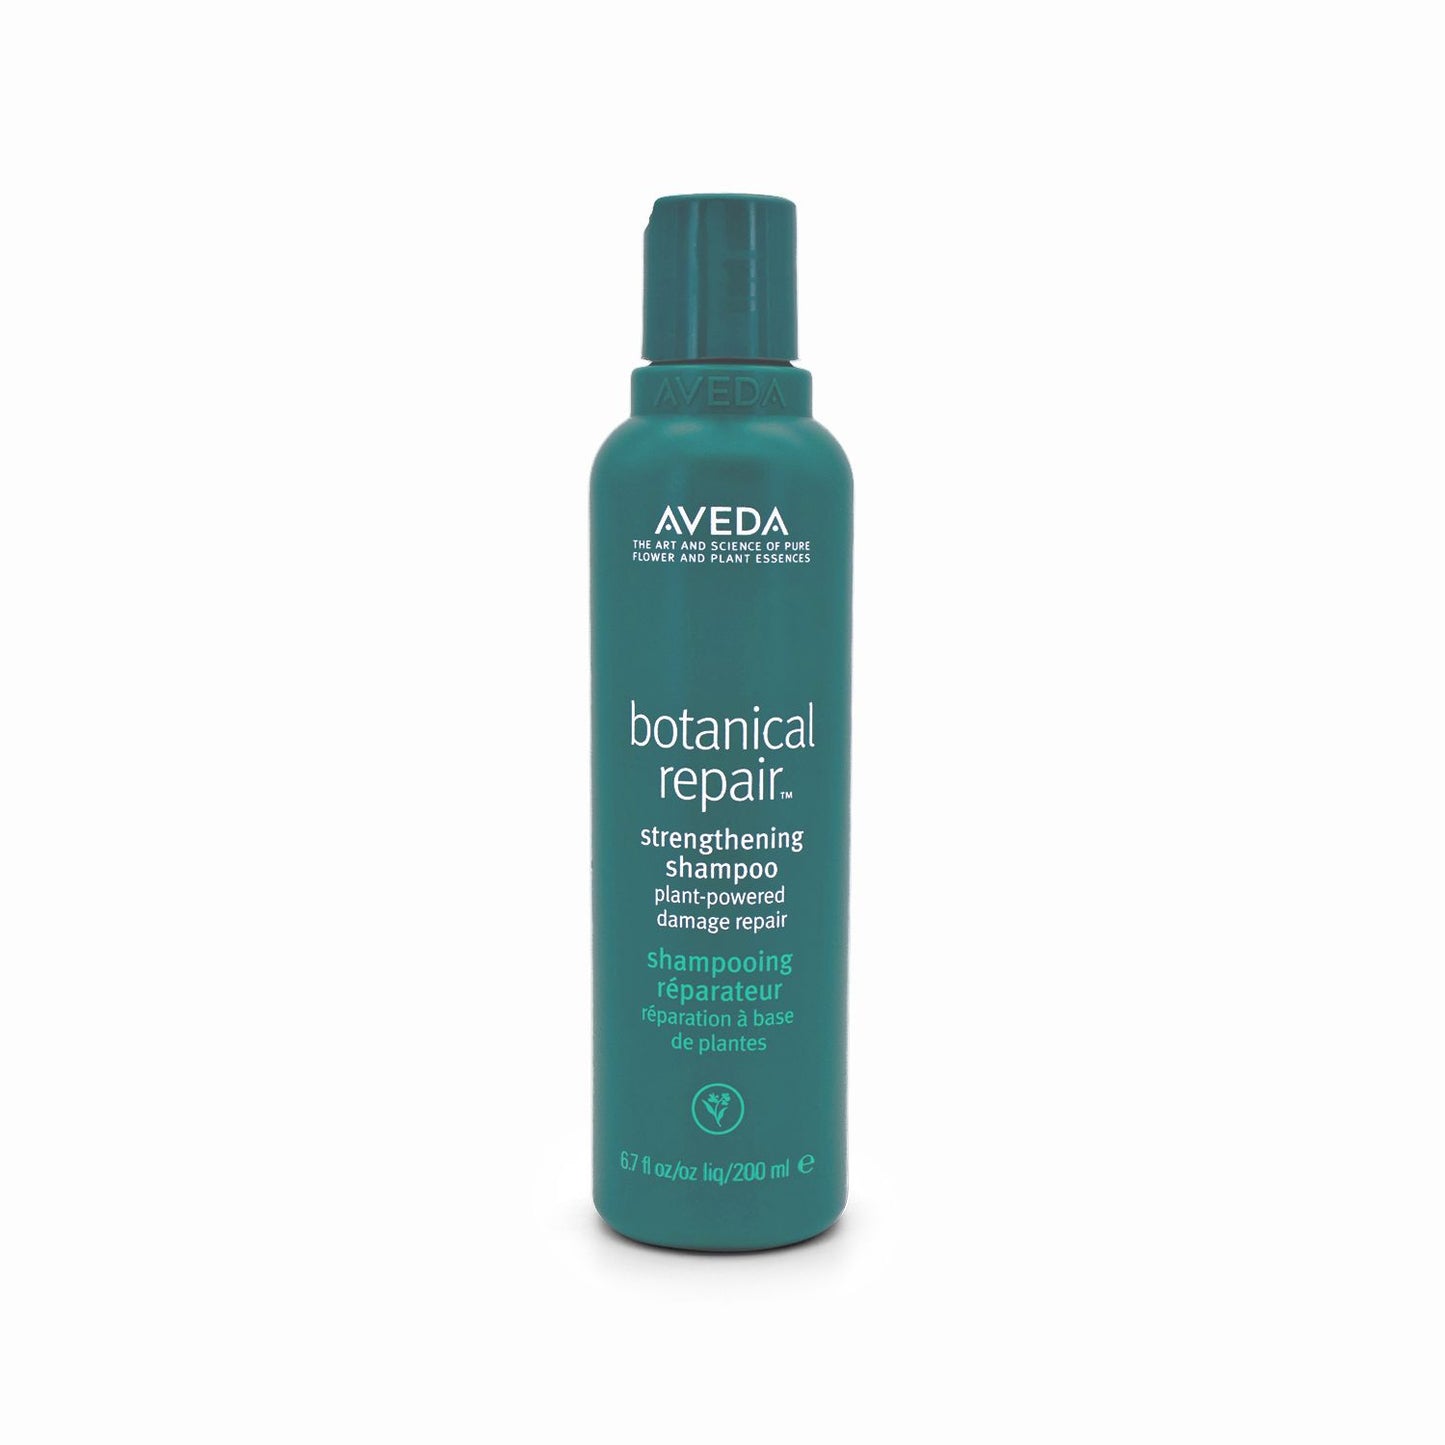 Aveda Botanical Repair Strengthening Shampoo 200ml - Imperfect Container - This is Beauty UK